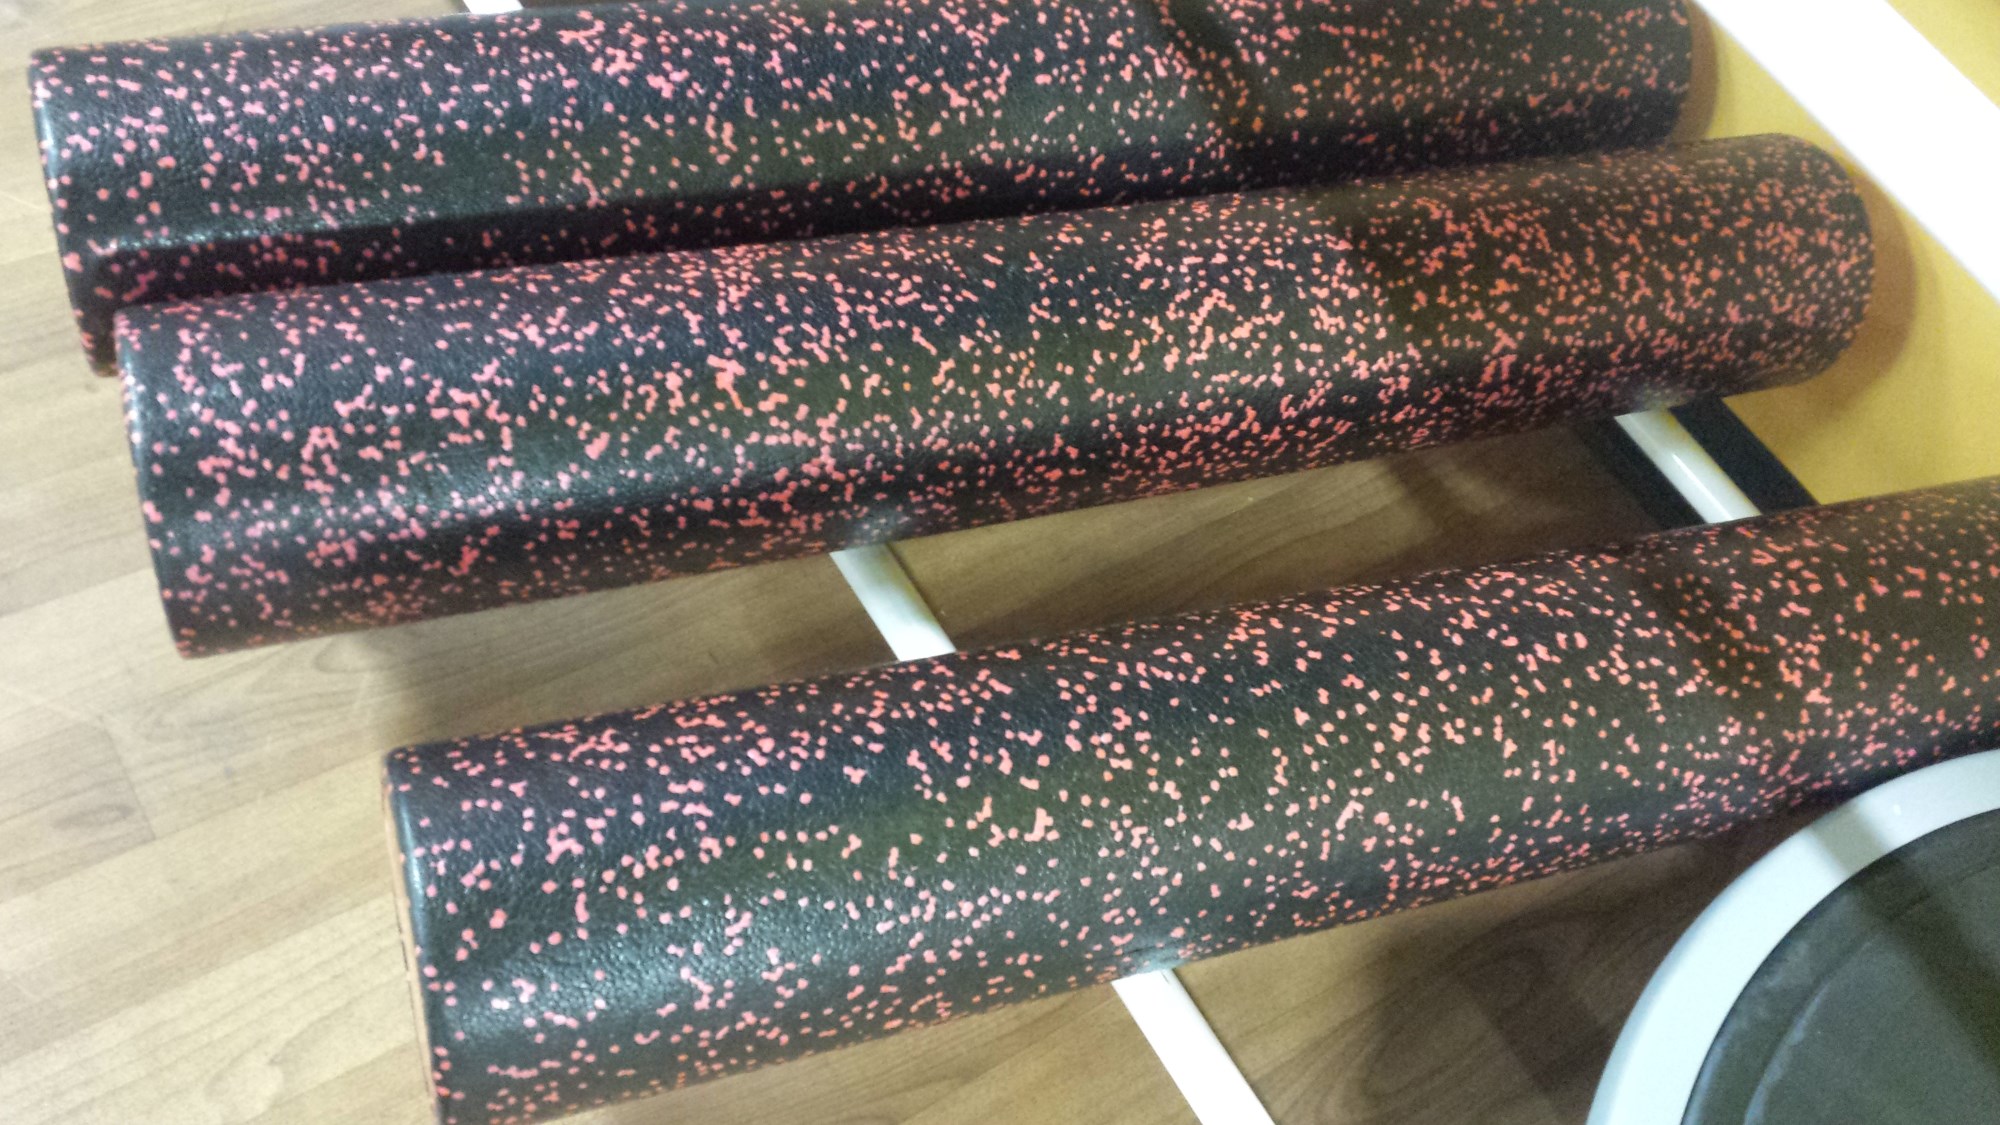 3 speckled foam rollers at the gym - photo by popular fitness